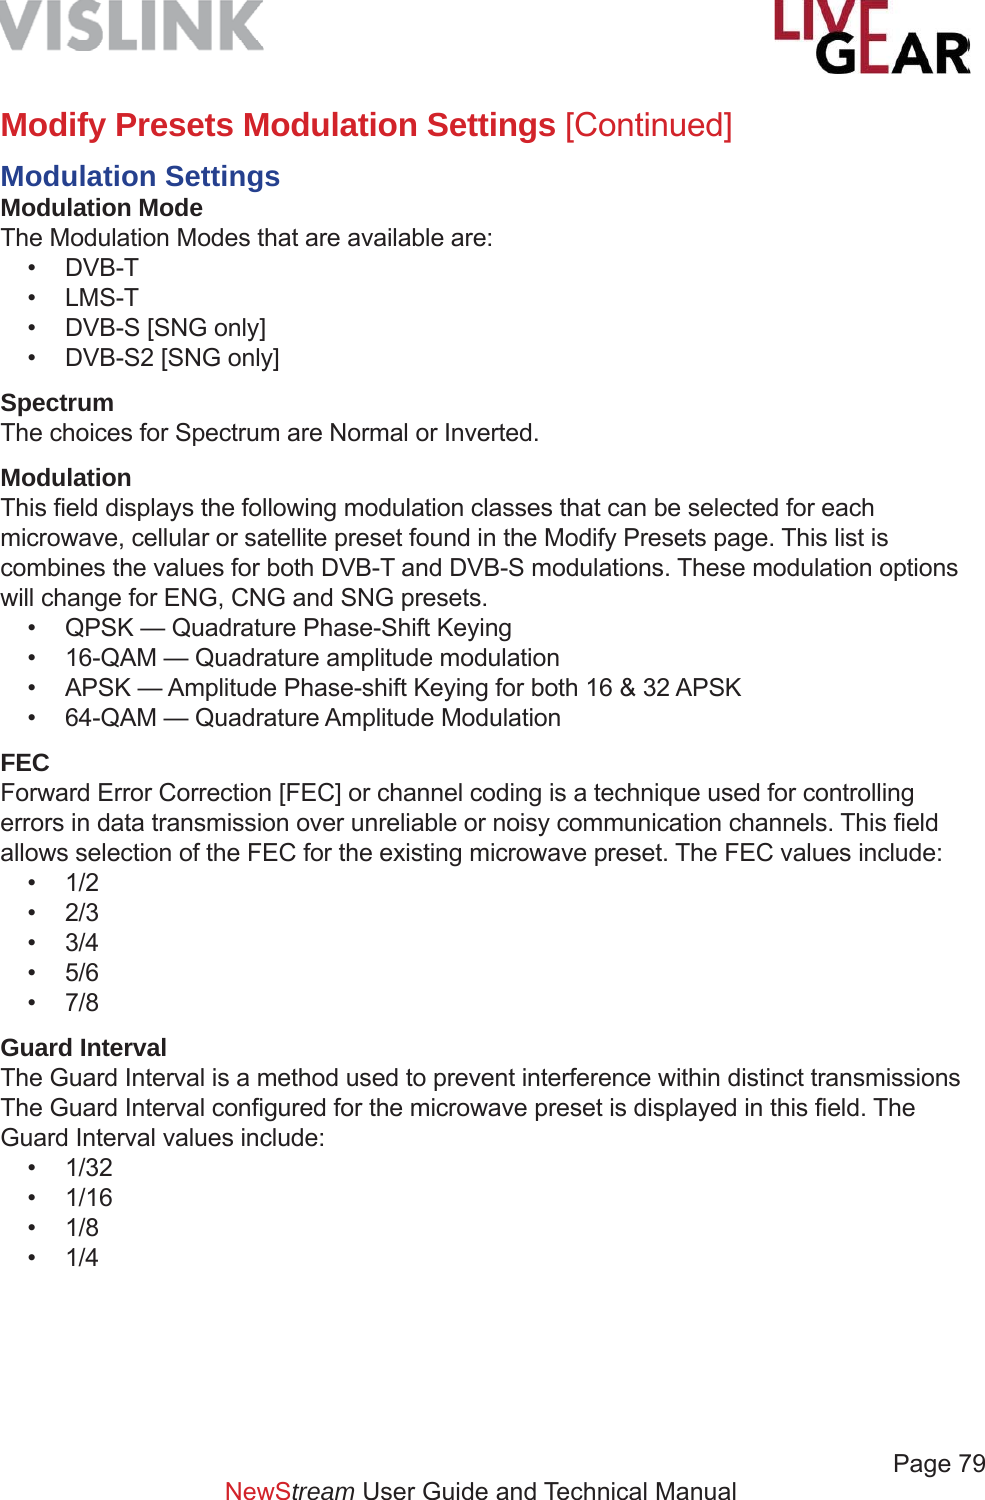             Page 79NewStream User Guide and Technical ManualModify Presets Modulation Settings [Continued]Modulation SettingsModulation ModeThe Modulation Modes that are available are:• DVB-T• LMS-T•  DVB-S [SNG only]•  DVB-S2 [SNG only]SpectrumThe choices for Spectrum are Normal or Inverted.ModulationThis ﬁ eld displays the following modulation classes that can be selected for each microwave, cellular or satellite preset found in the Modify Presets page. This list is combines the values for both DVB-T and DVB-S modulations. These modulation options will change for ENG, CNG and SNG presets. •  QPSK — Quadrature Phase-Shift Keying•  16-QAM — Quadrature amplitude modulation•  APSK — Amplitude Phase-shift Keying for both 16 &amp; 32 APSK•  64-QAM — Quadrature Amplitude ModulationFECForward Error Correction [FEC] or channel coding is a technique used for controlling errors in data transmission over unreliable or noisy communication channels. This ﬁ eld allows selection of the FEC for the existing microwave preset. The FEC values include:• 1/2• 2/3• 3/4• 5/6• 7/8Guard IntervalThe Guard Interval is a method used to prevent interference within distinct transmissions The Guard Interval conﬁ gured for the microwave preset is displayed in this ﬁ eld. The Guard Interval values include:• 1/32• 1/16• 1/8• 1/4